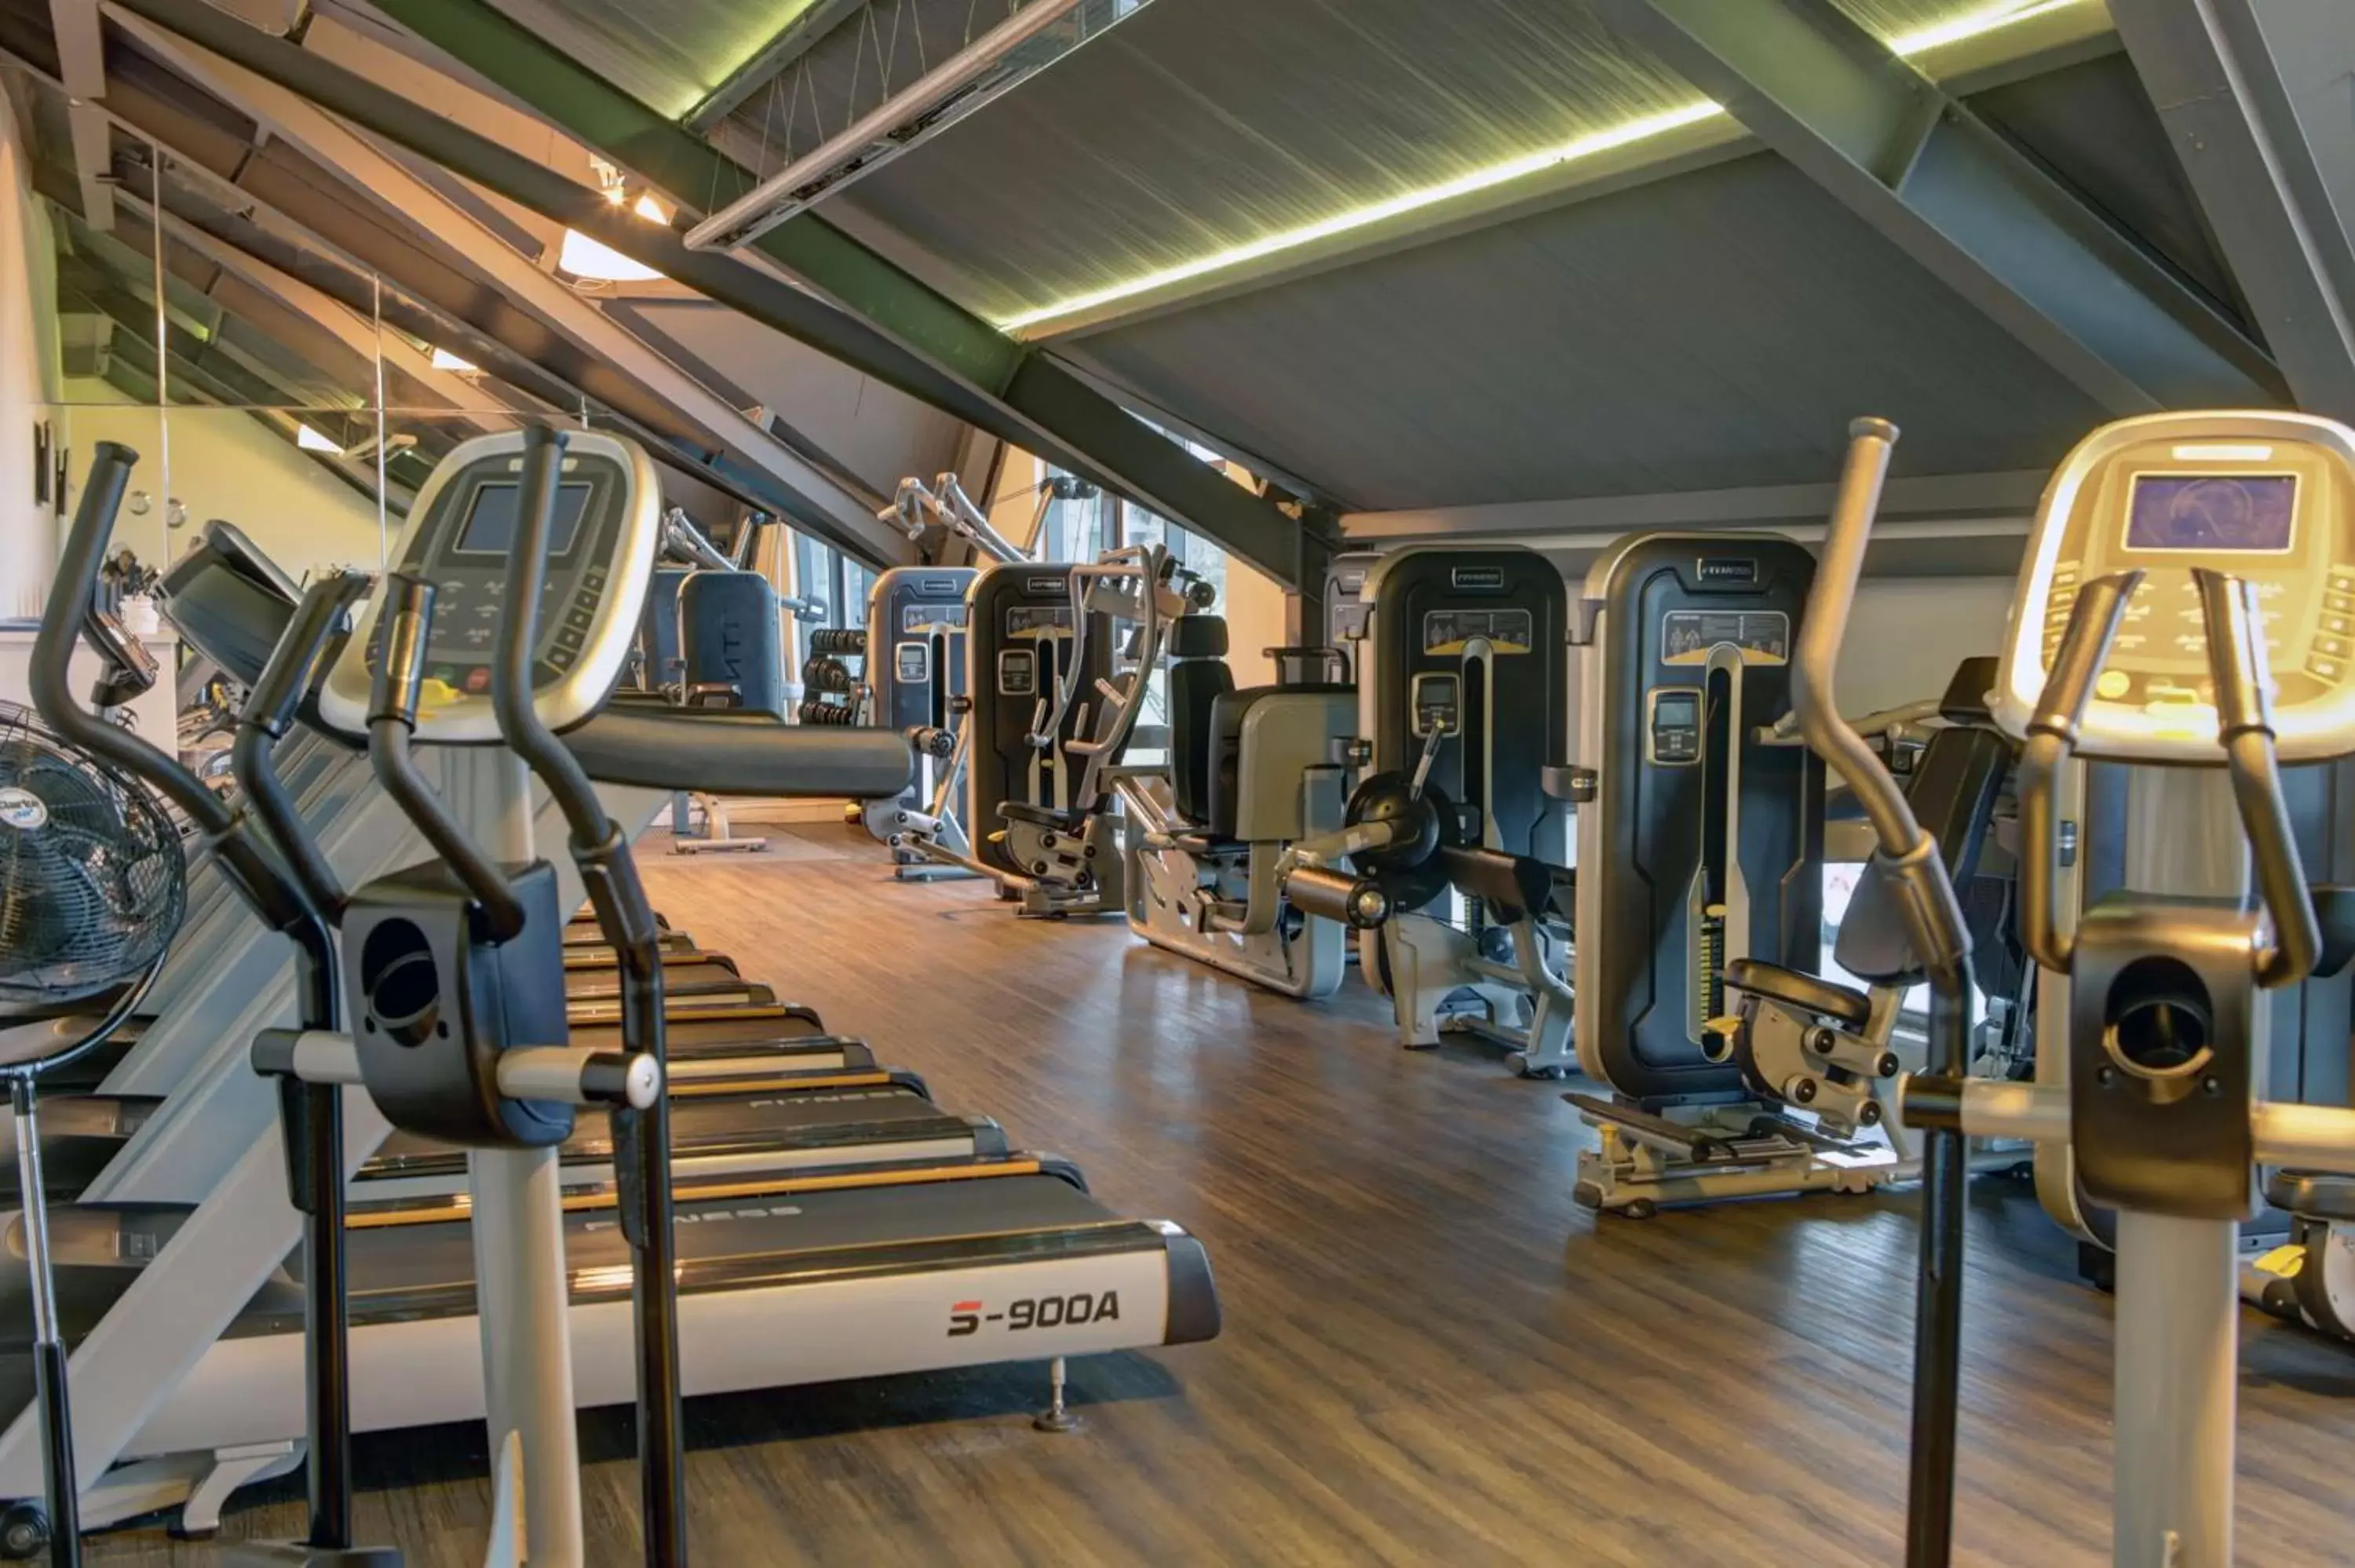 Fitness centre/facilities, Fitness Center/Facilities in Derwent Manor Boutique Hotel, BW Premier Collection